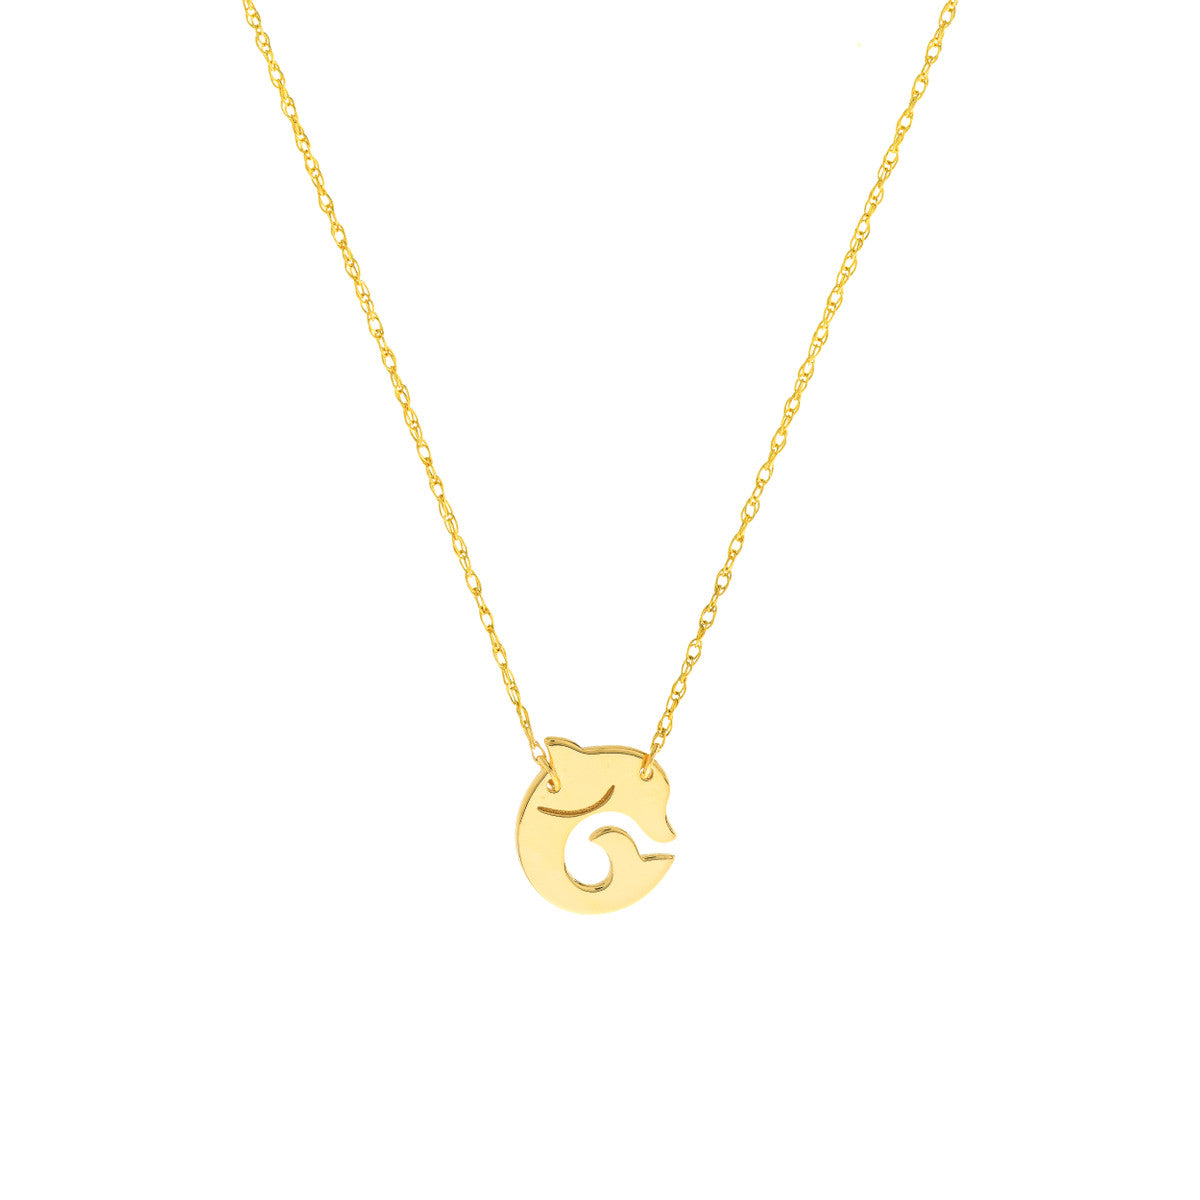 So You Mini Dolphin Adjustable Necklace